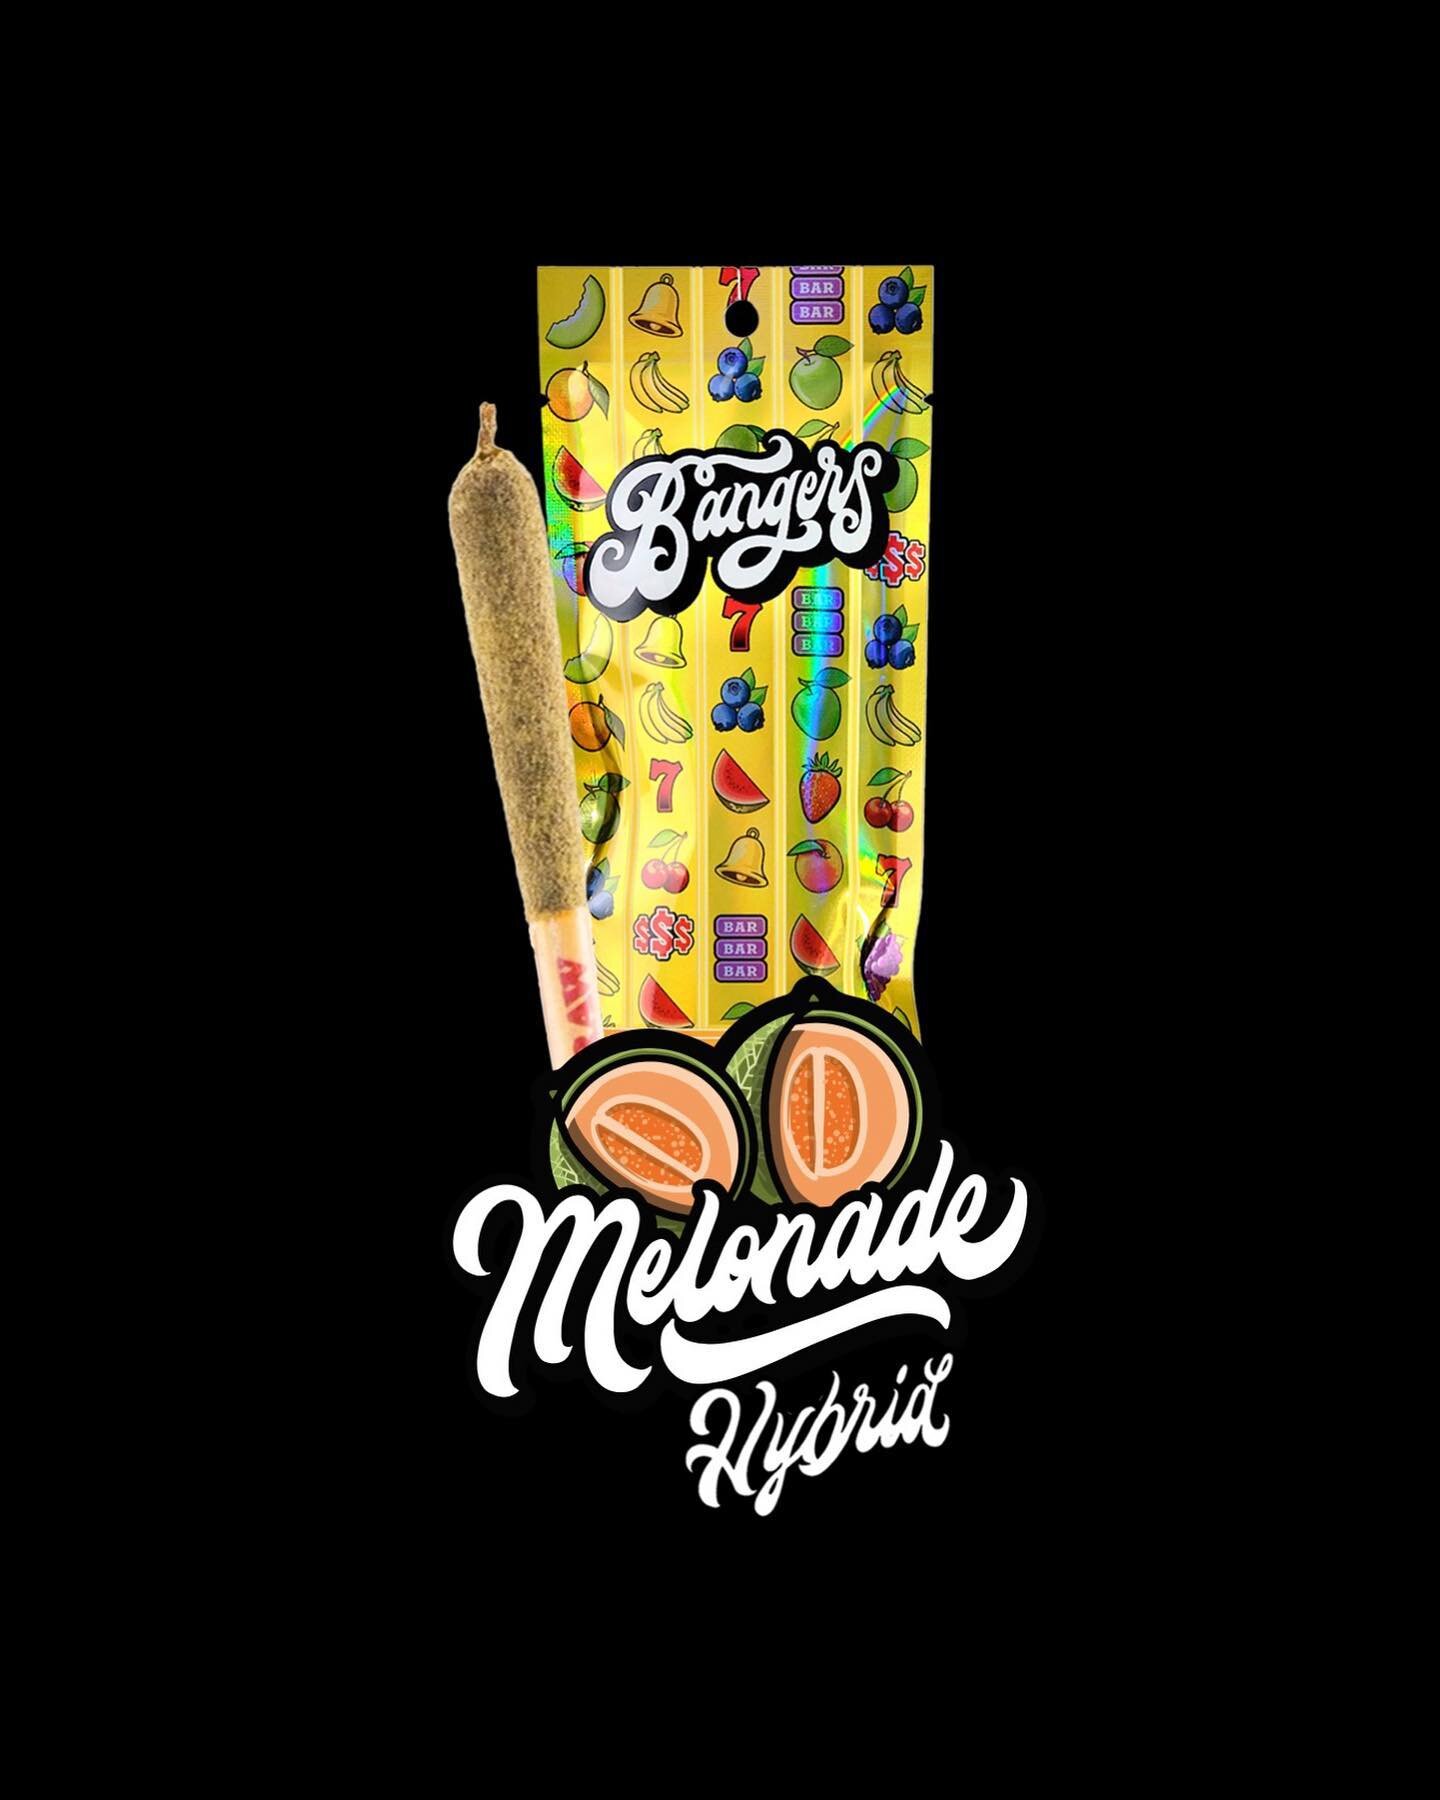 Dive into our refreshing Melonade&hellip;..
(Diamond Infused and Kief Rolled)💎 

__________________

This Hybrid strain combines the sweetness of ripe melon with a refreshing lemonade zing. 
___________________

To find Bangers near you, tap on the 